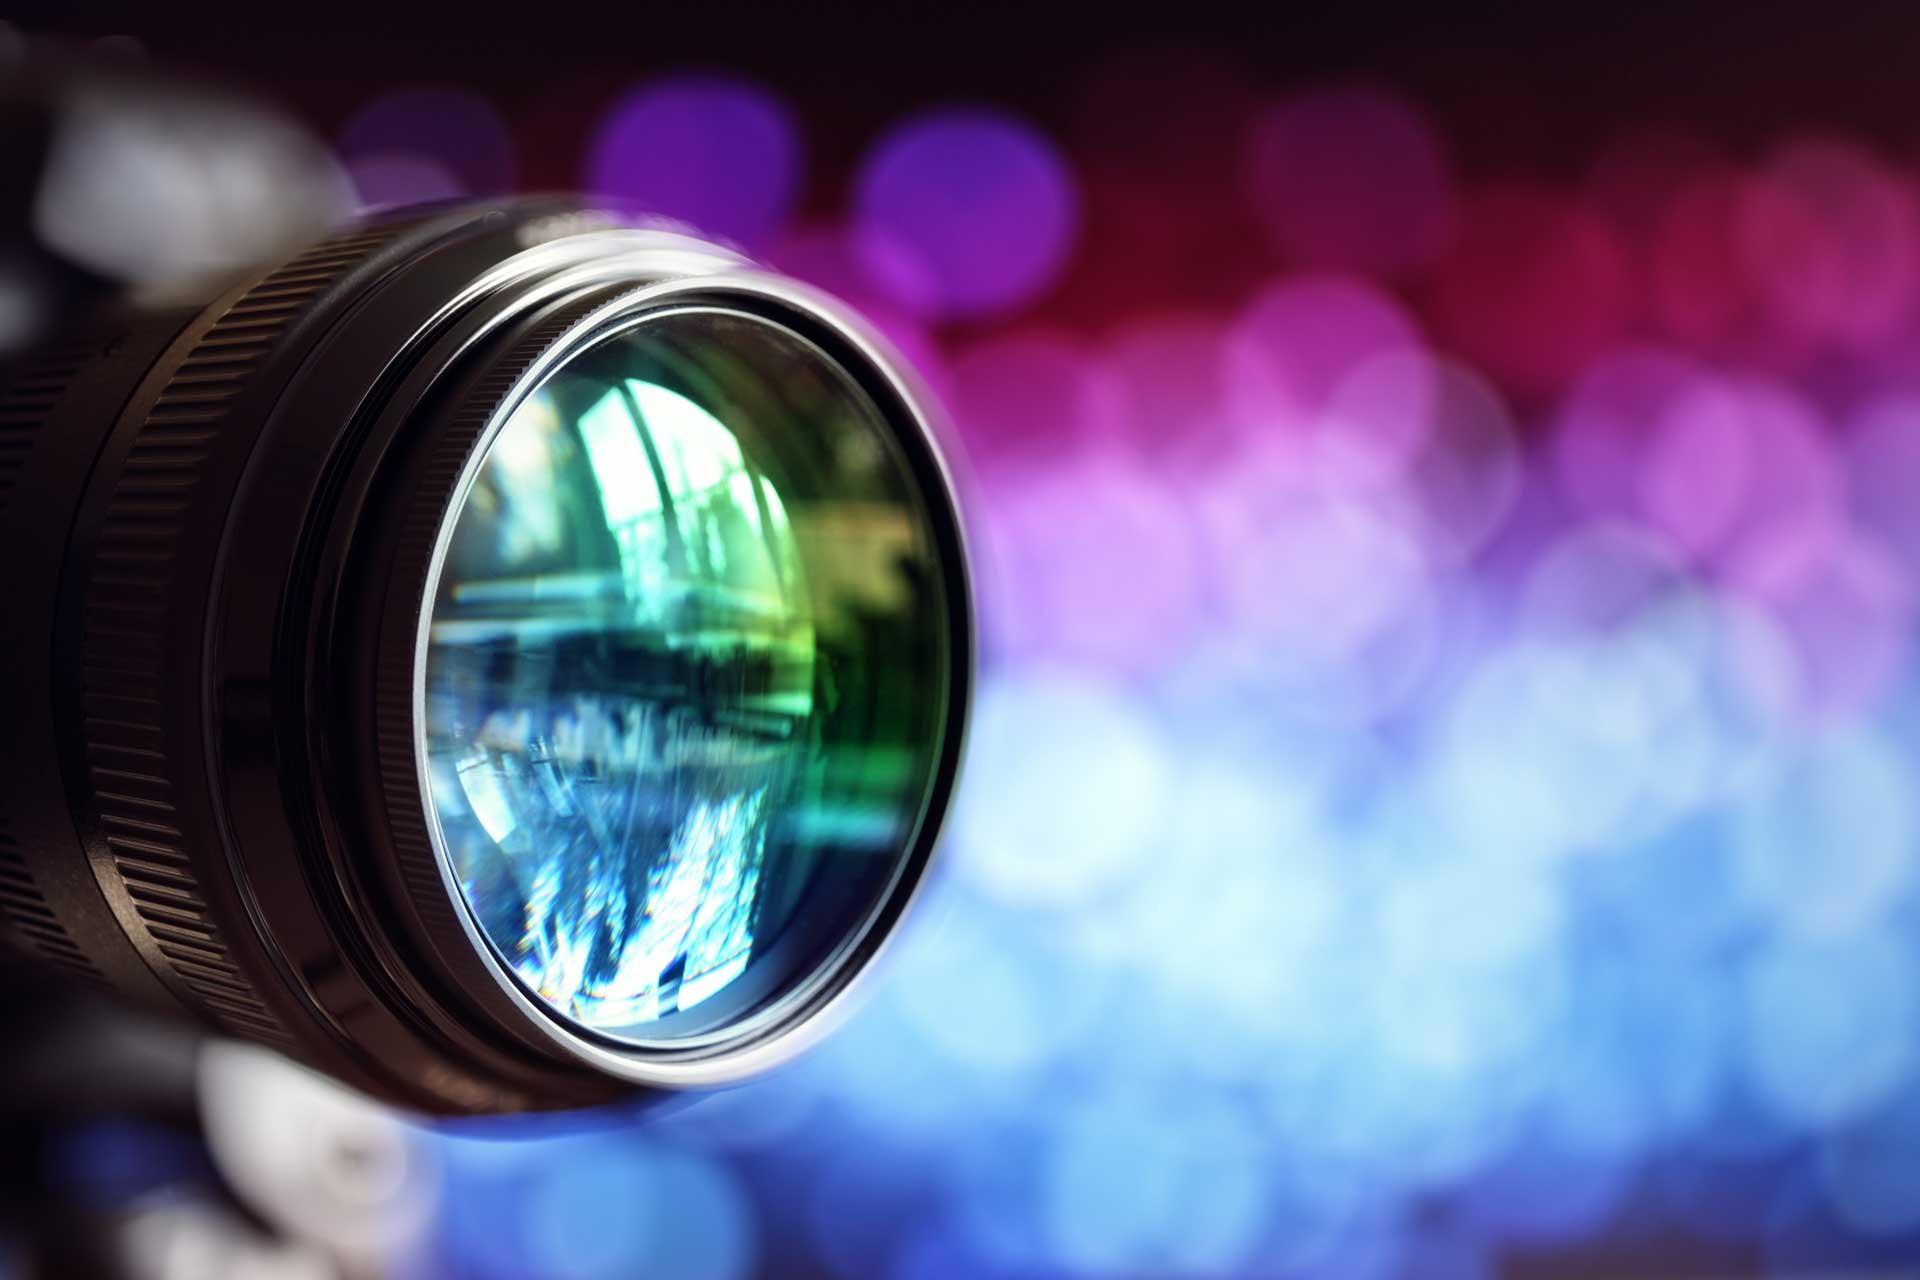 Close-up of a camera lens reflecting the blue and purple lights surrounding it.